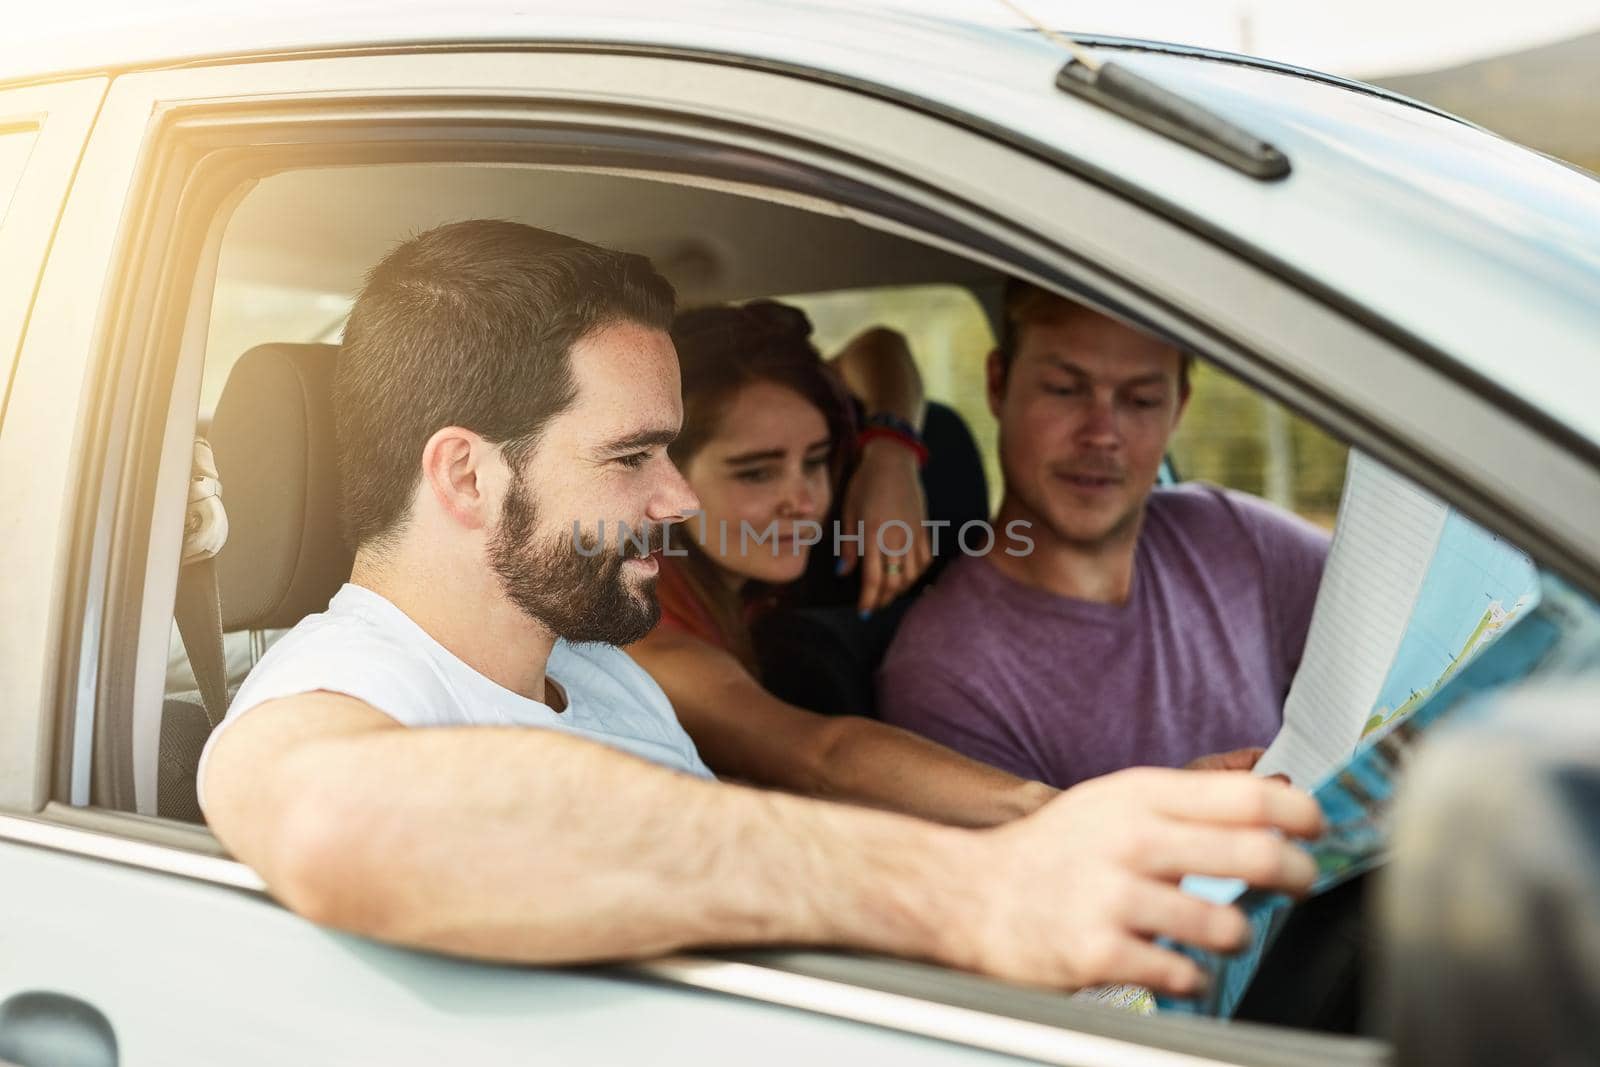 Shot of a group of young friends getting ready to drive to their destination in their vehicle while looking at a map.